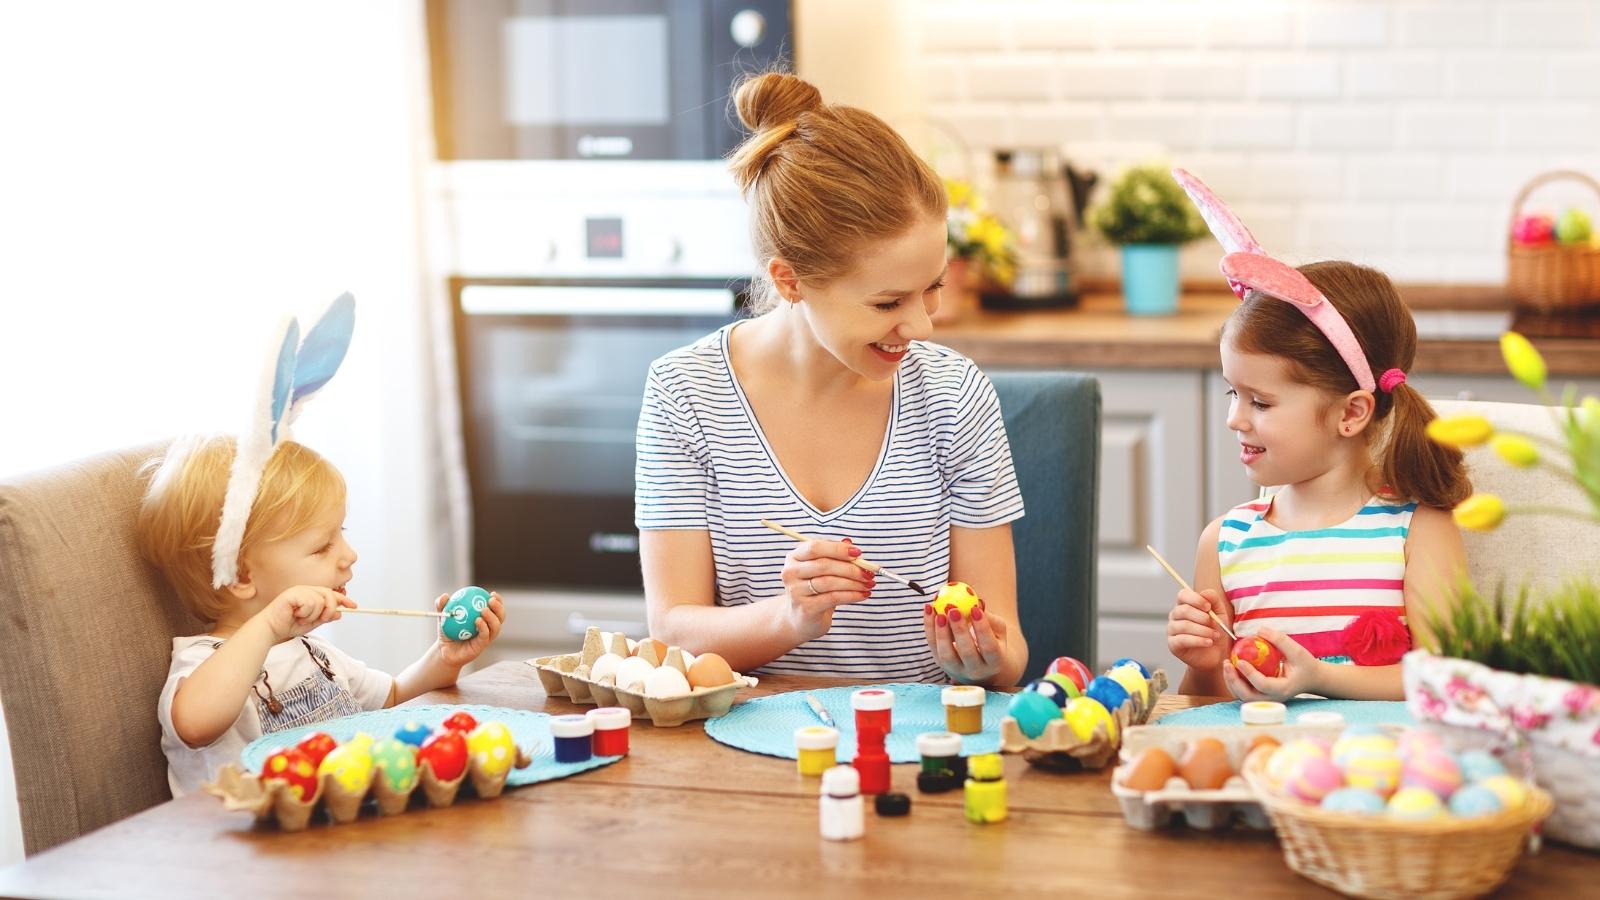 23 easy and fun Easter ideas for kids that you can try at home